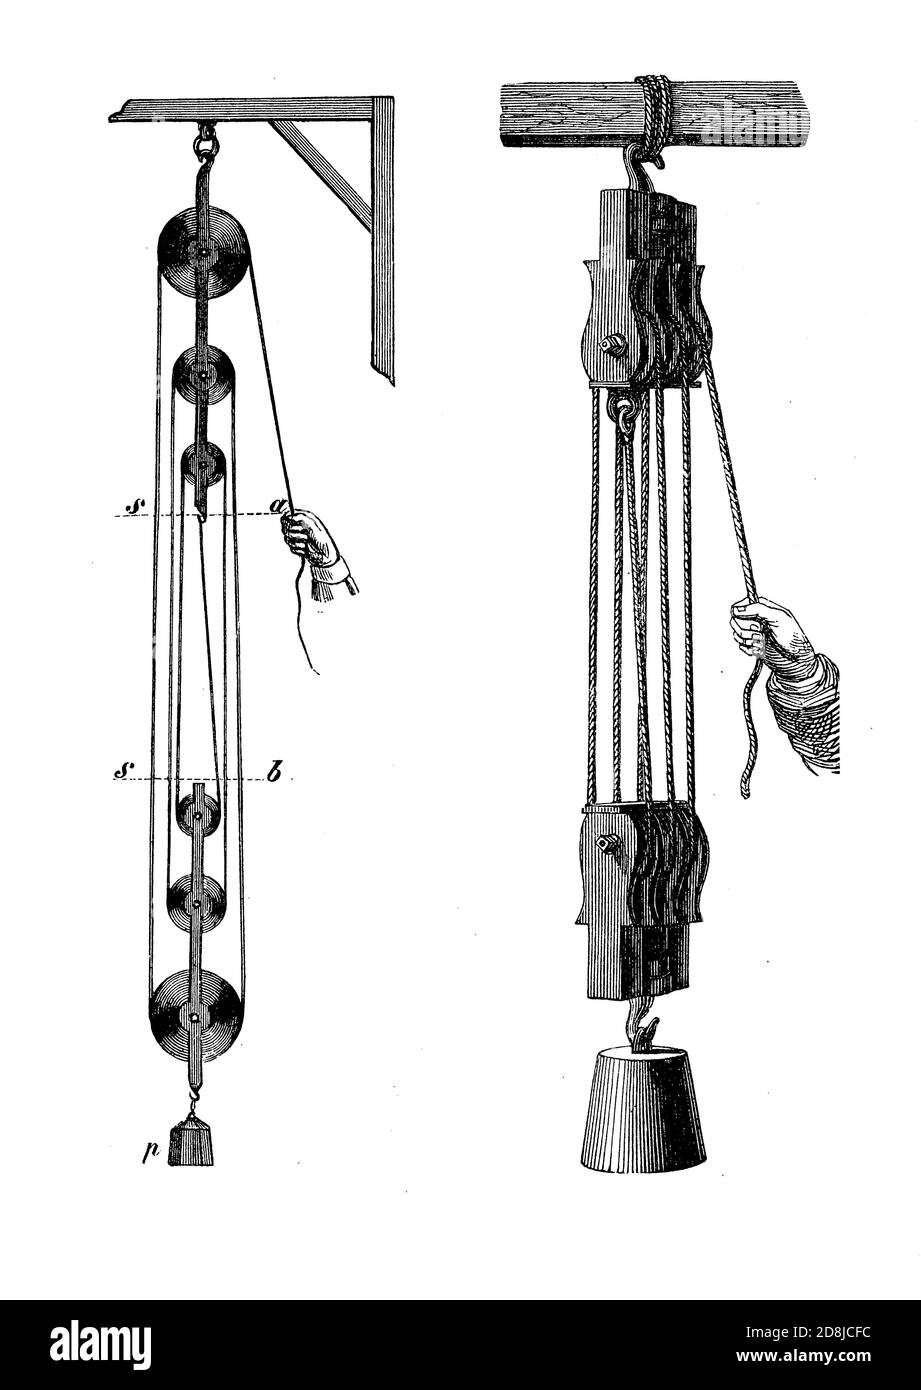 Vintage illustration: block and tackle, system of more pulleys with a rope or cable between them, usually used to lift heavy loads amplifying the force applied to the rope Stock Photo